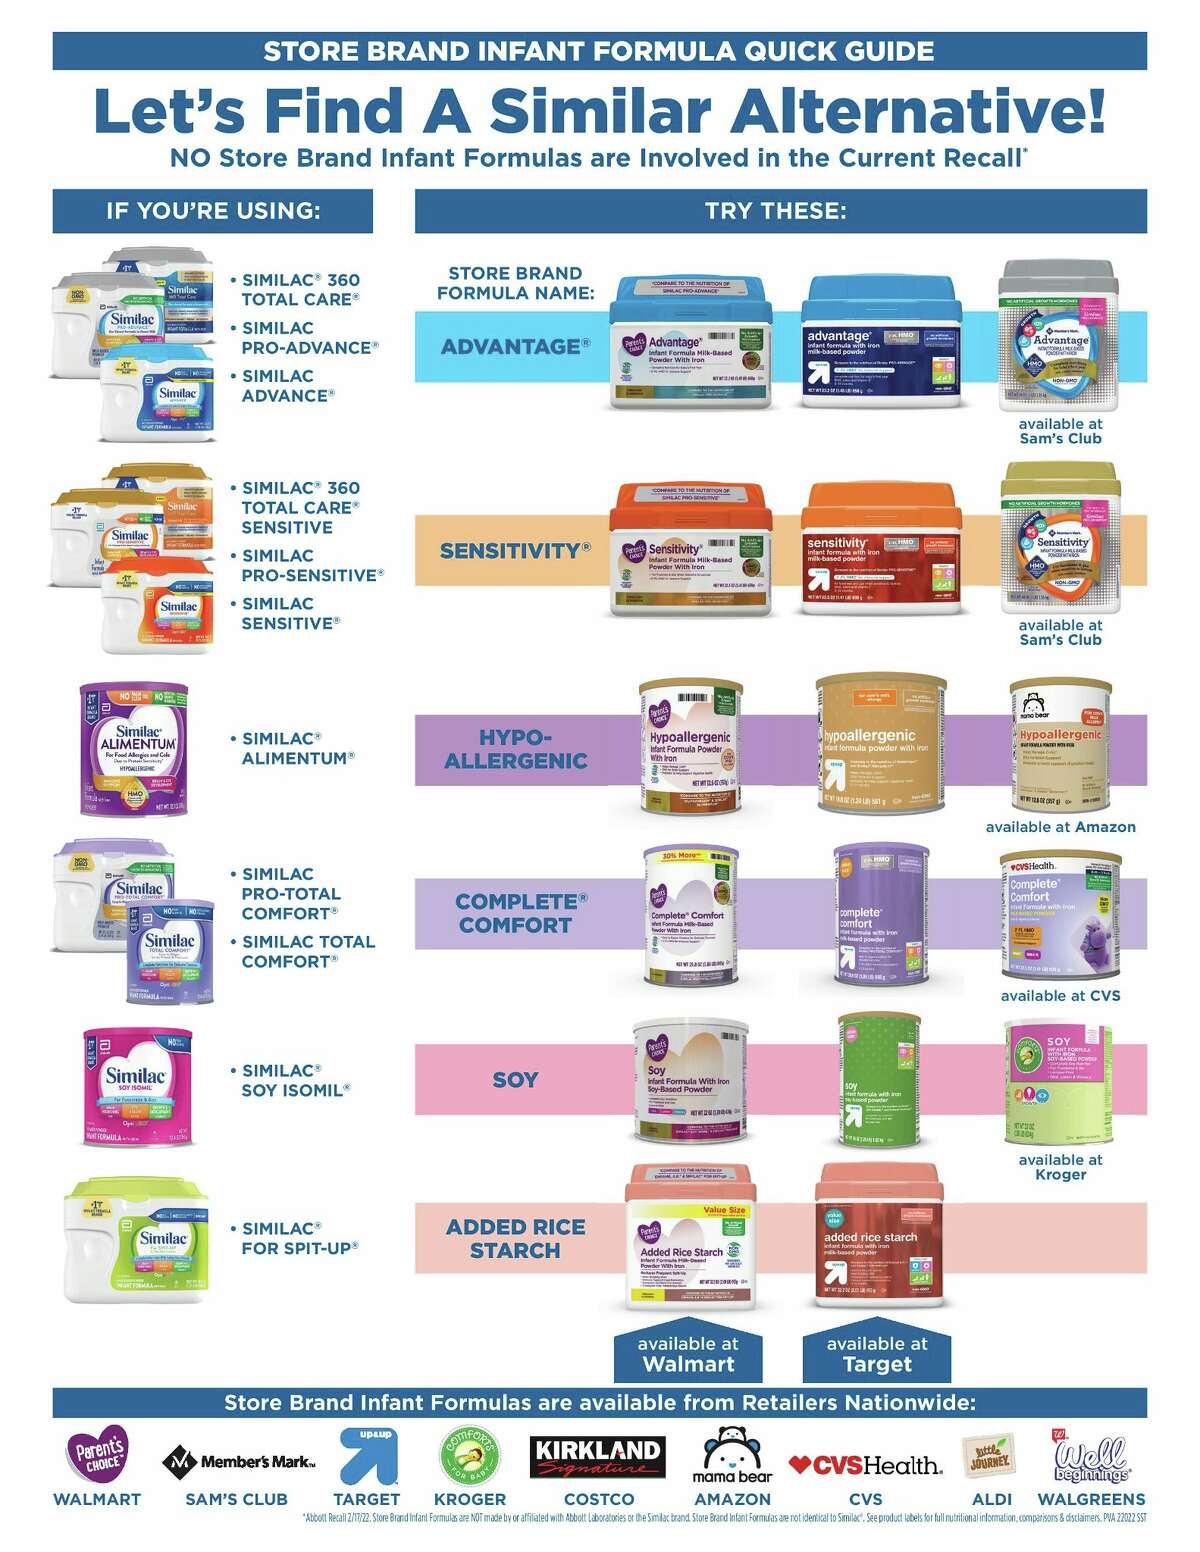 This infographic posted to Facebook by Power in Changing has brought increased attention to store brand baby formulas as alternatives to name brand formulas amid the ongoing shortage resulting from a recall in February 2022.